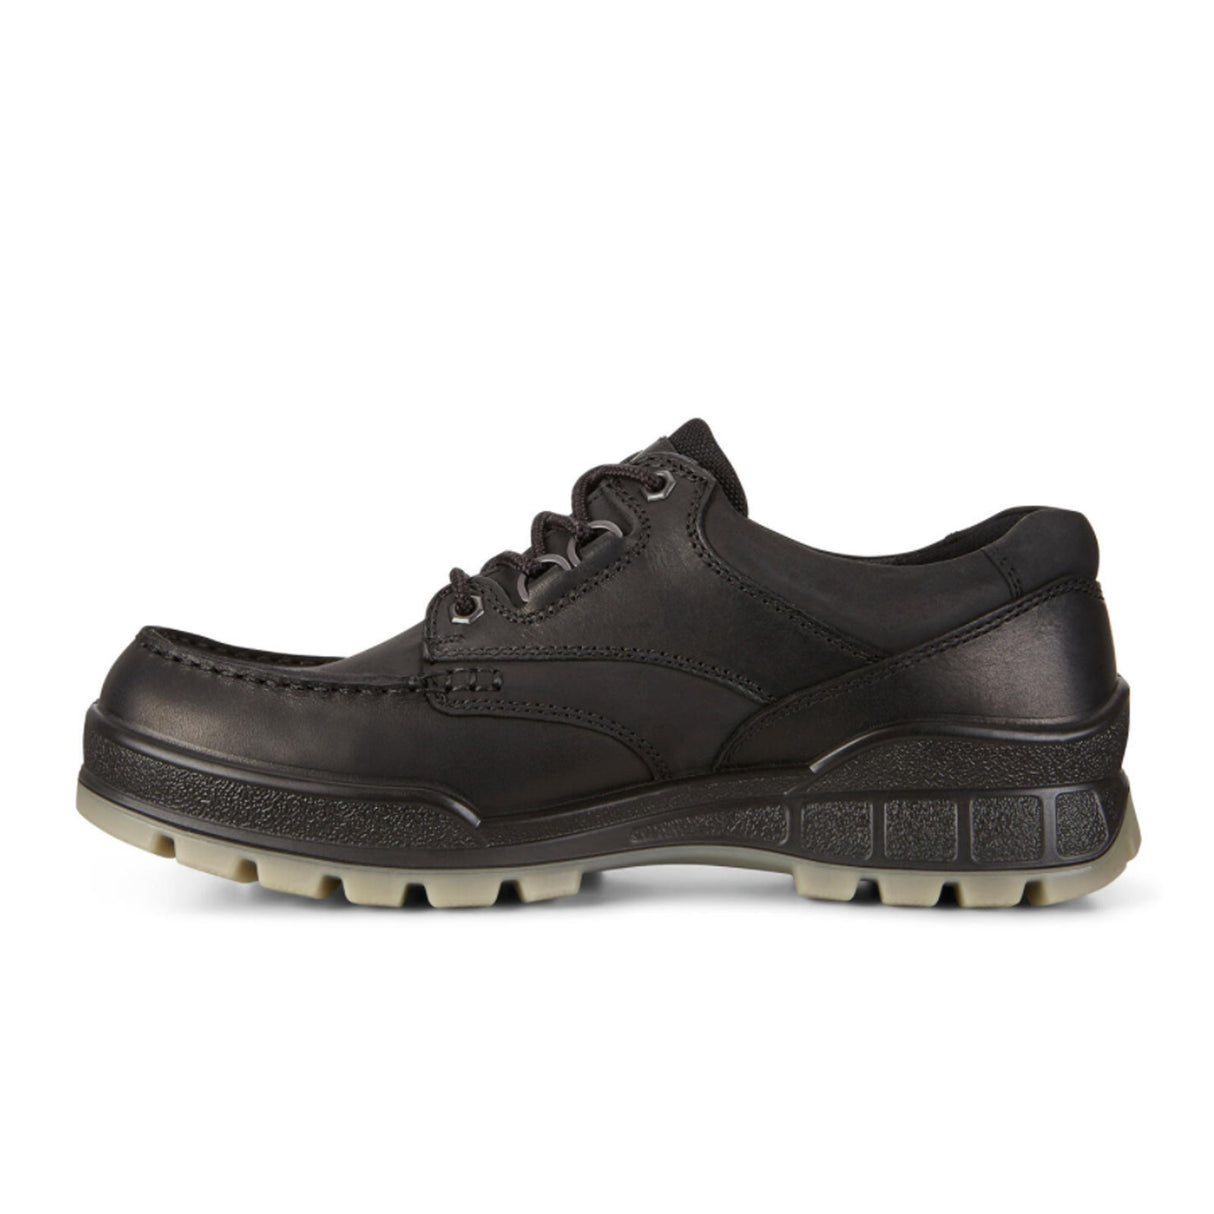 ECCO Track 25 Low Hiking Boot (Men) - Black/Black Hiking - Low - The Heel Shoe Fitters